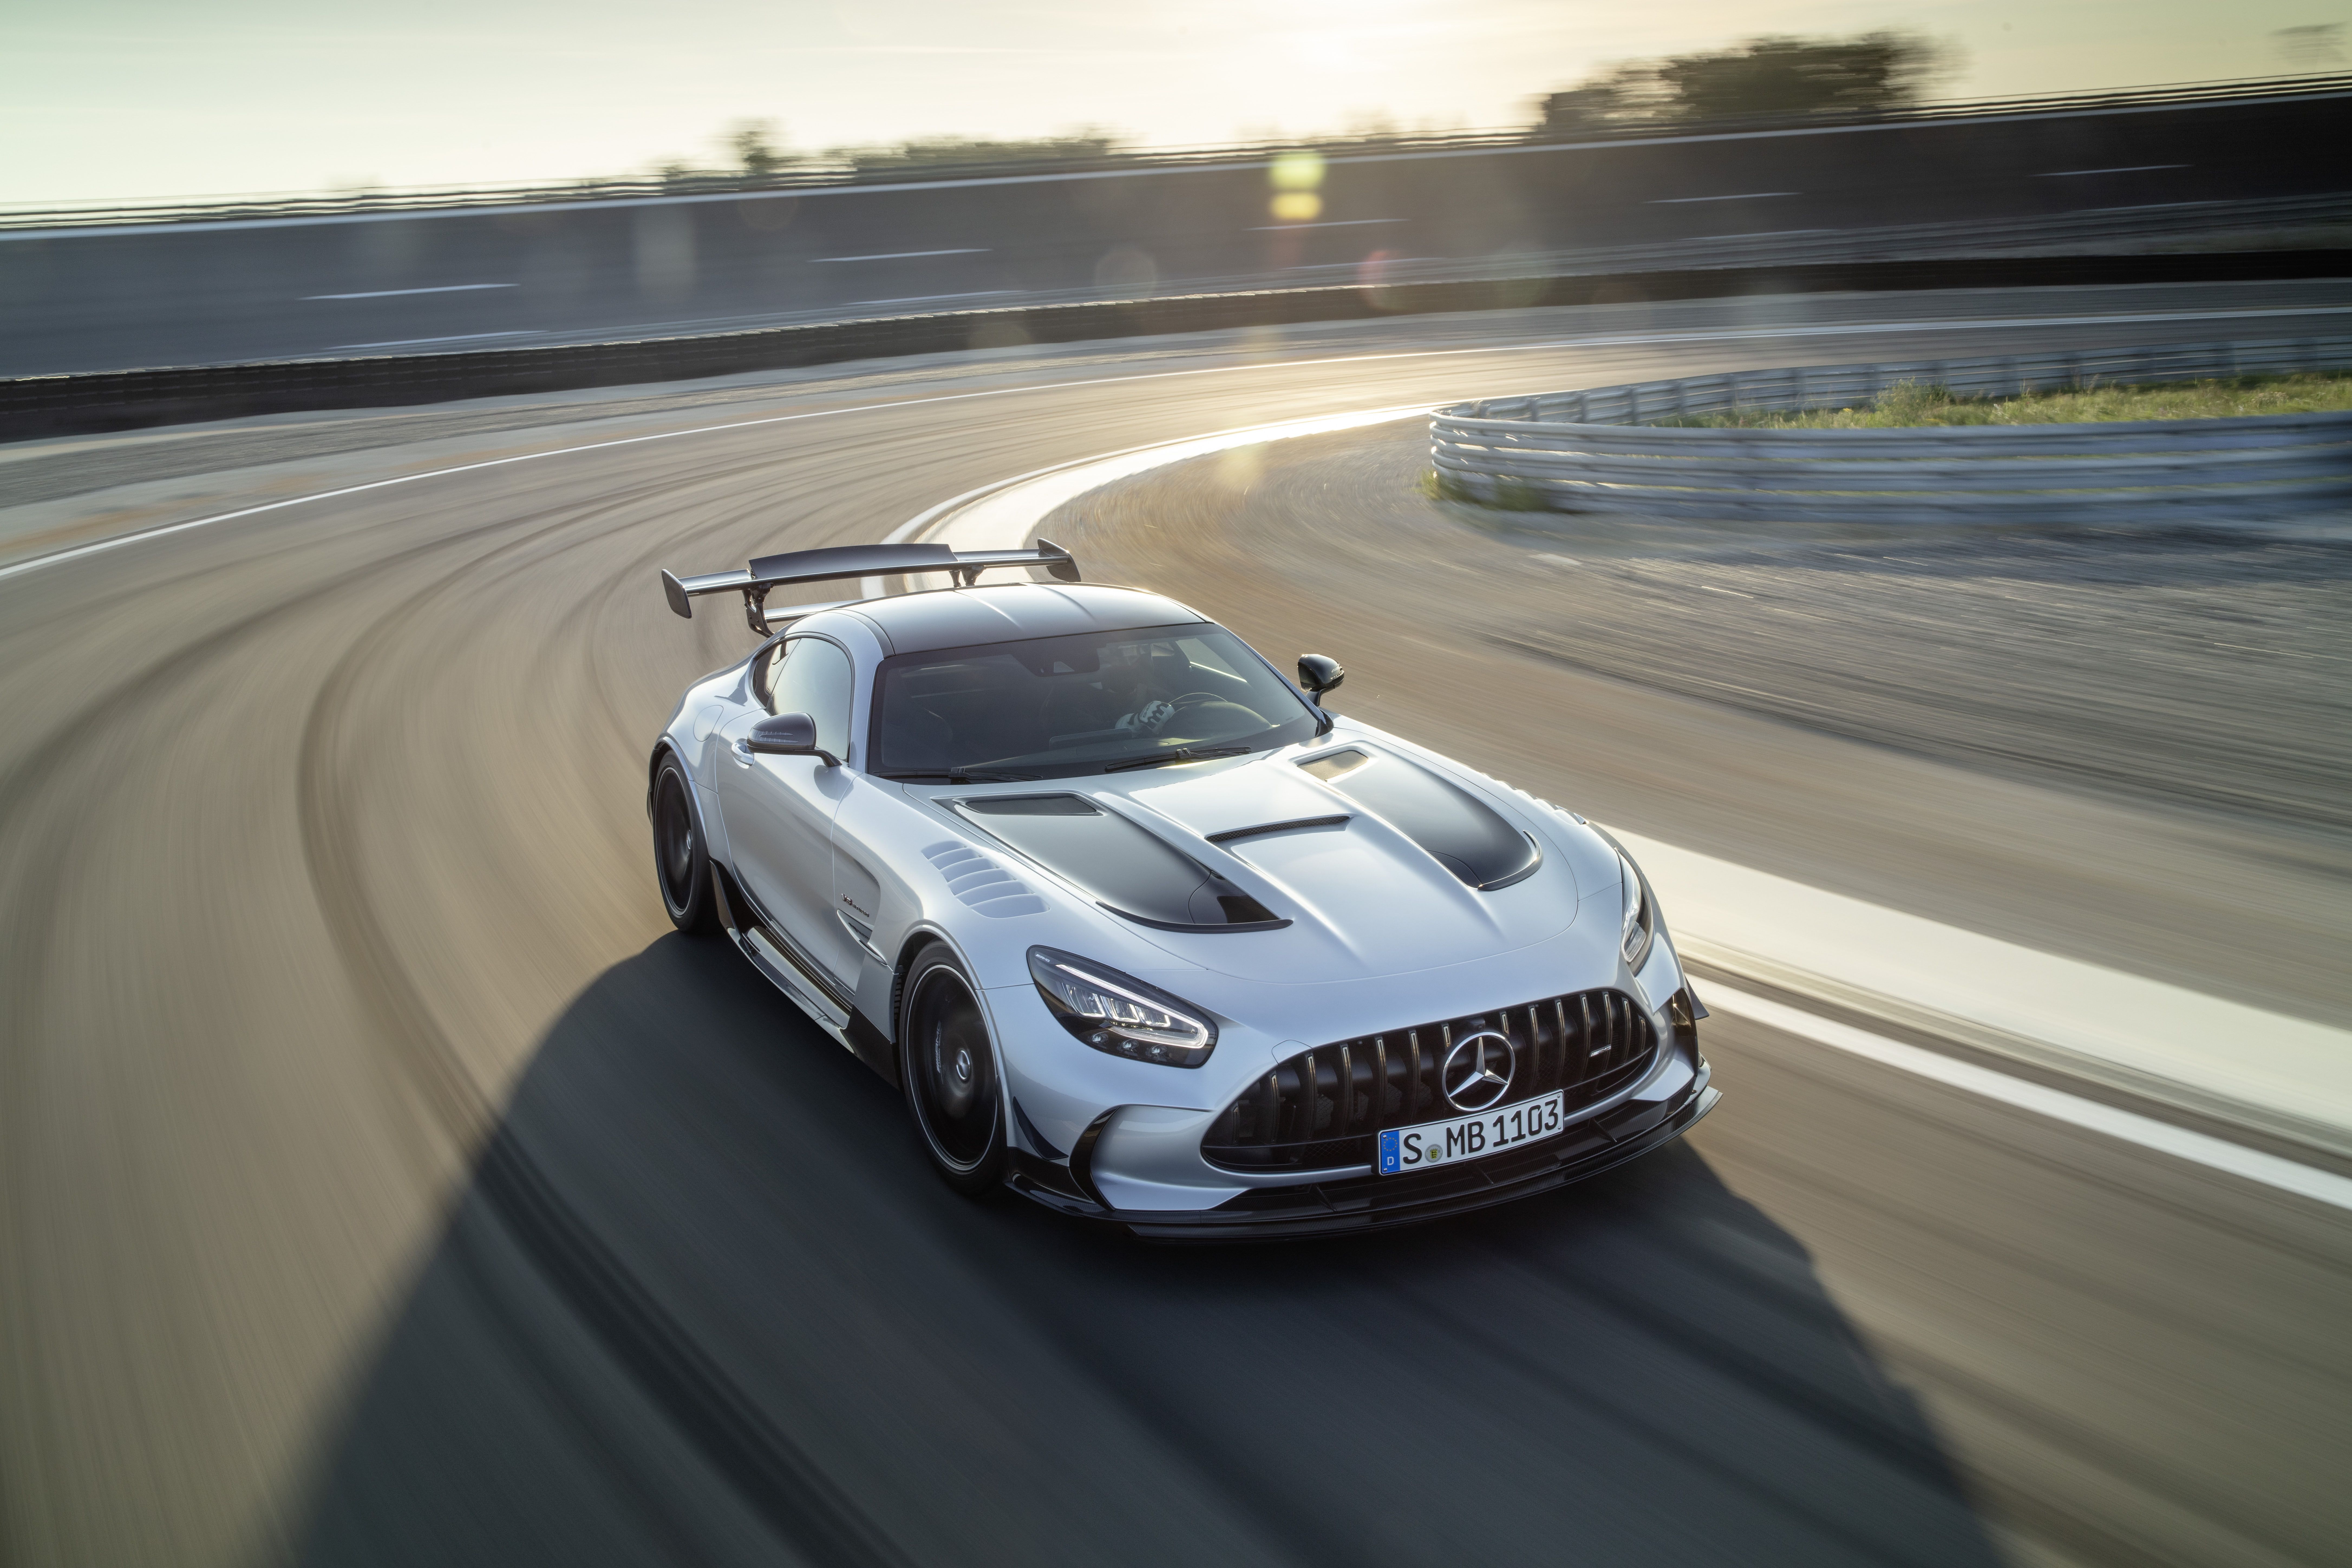 The Mercedes Amg Gt Black Series Is Here To Tackle Tracks